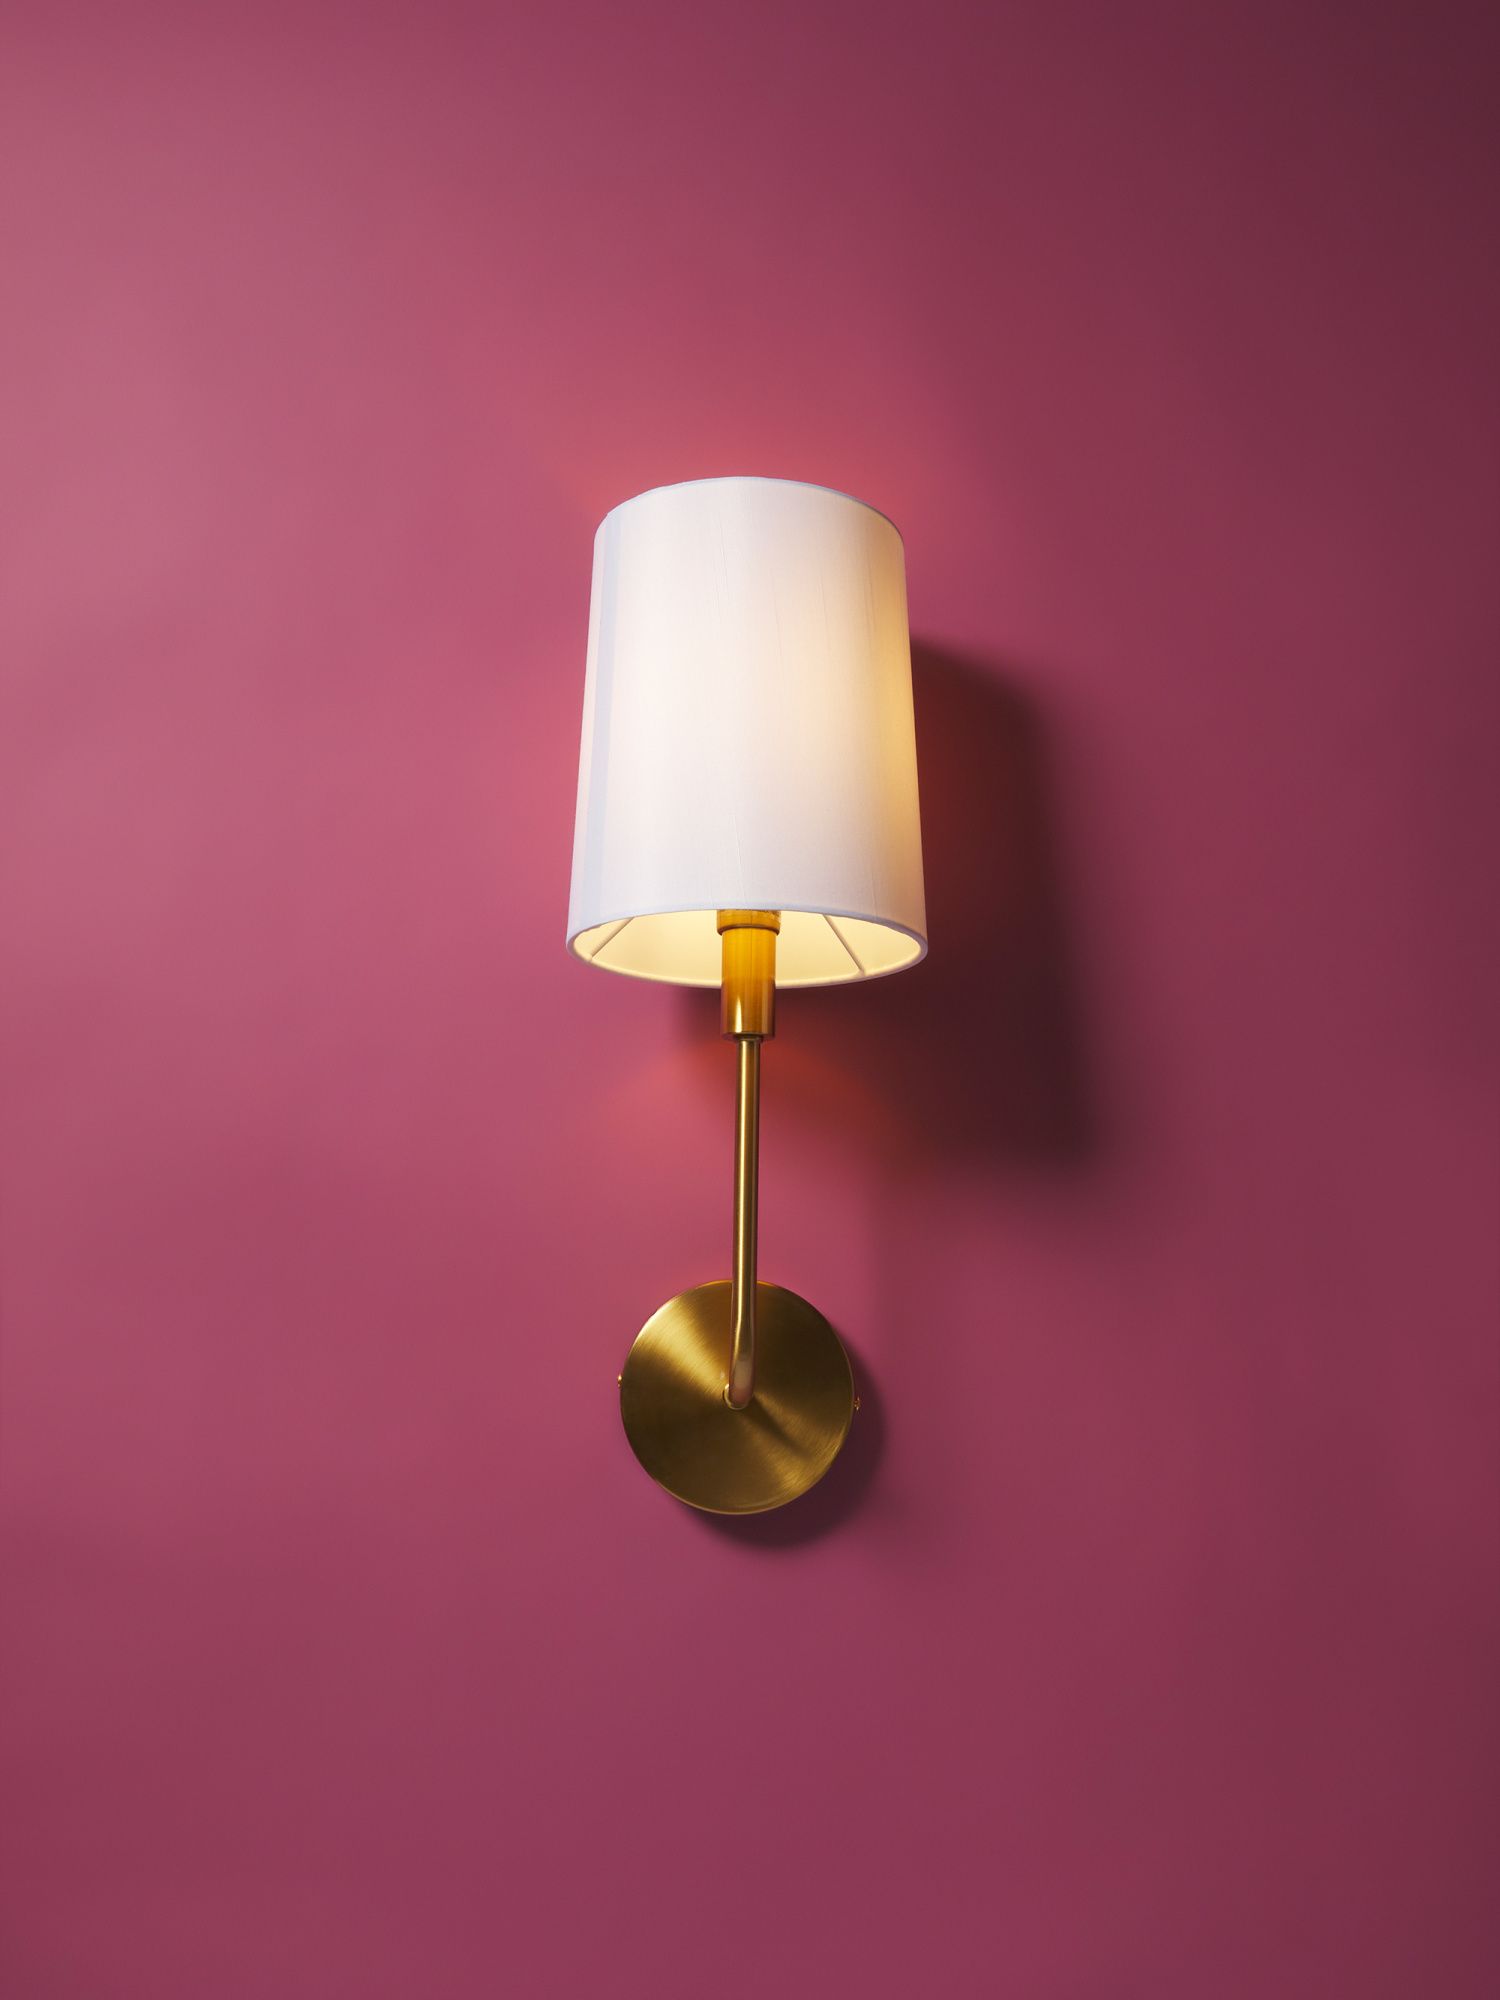 18in Metal Wall Sconce | HomeGoods